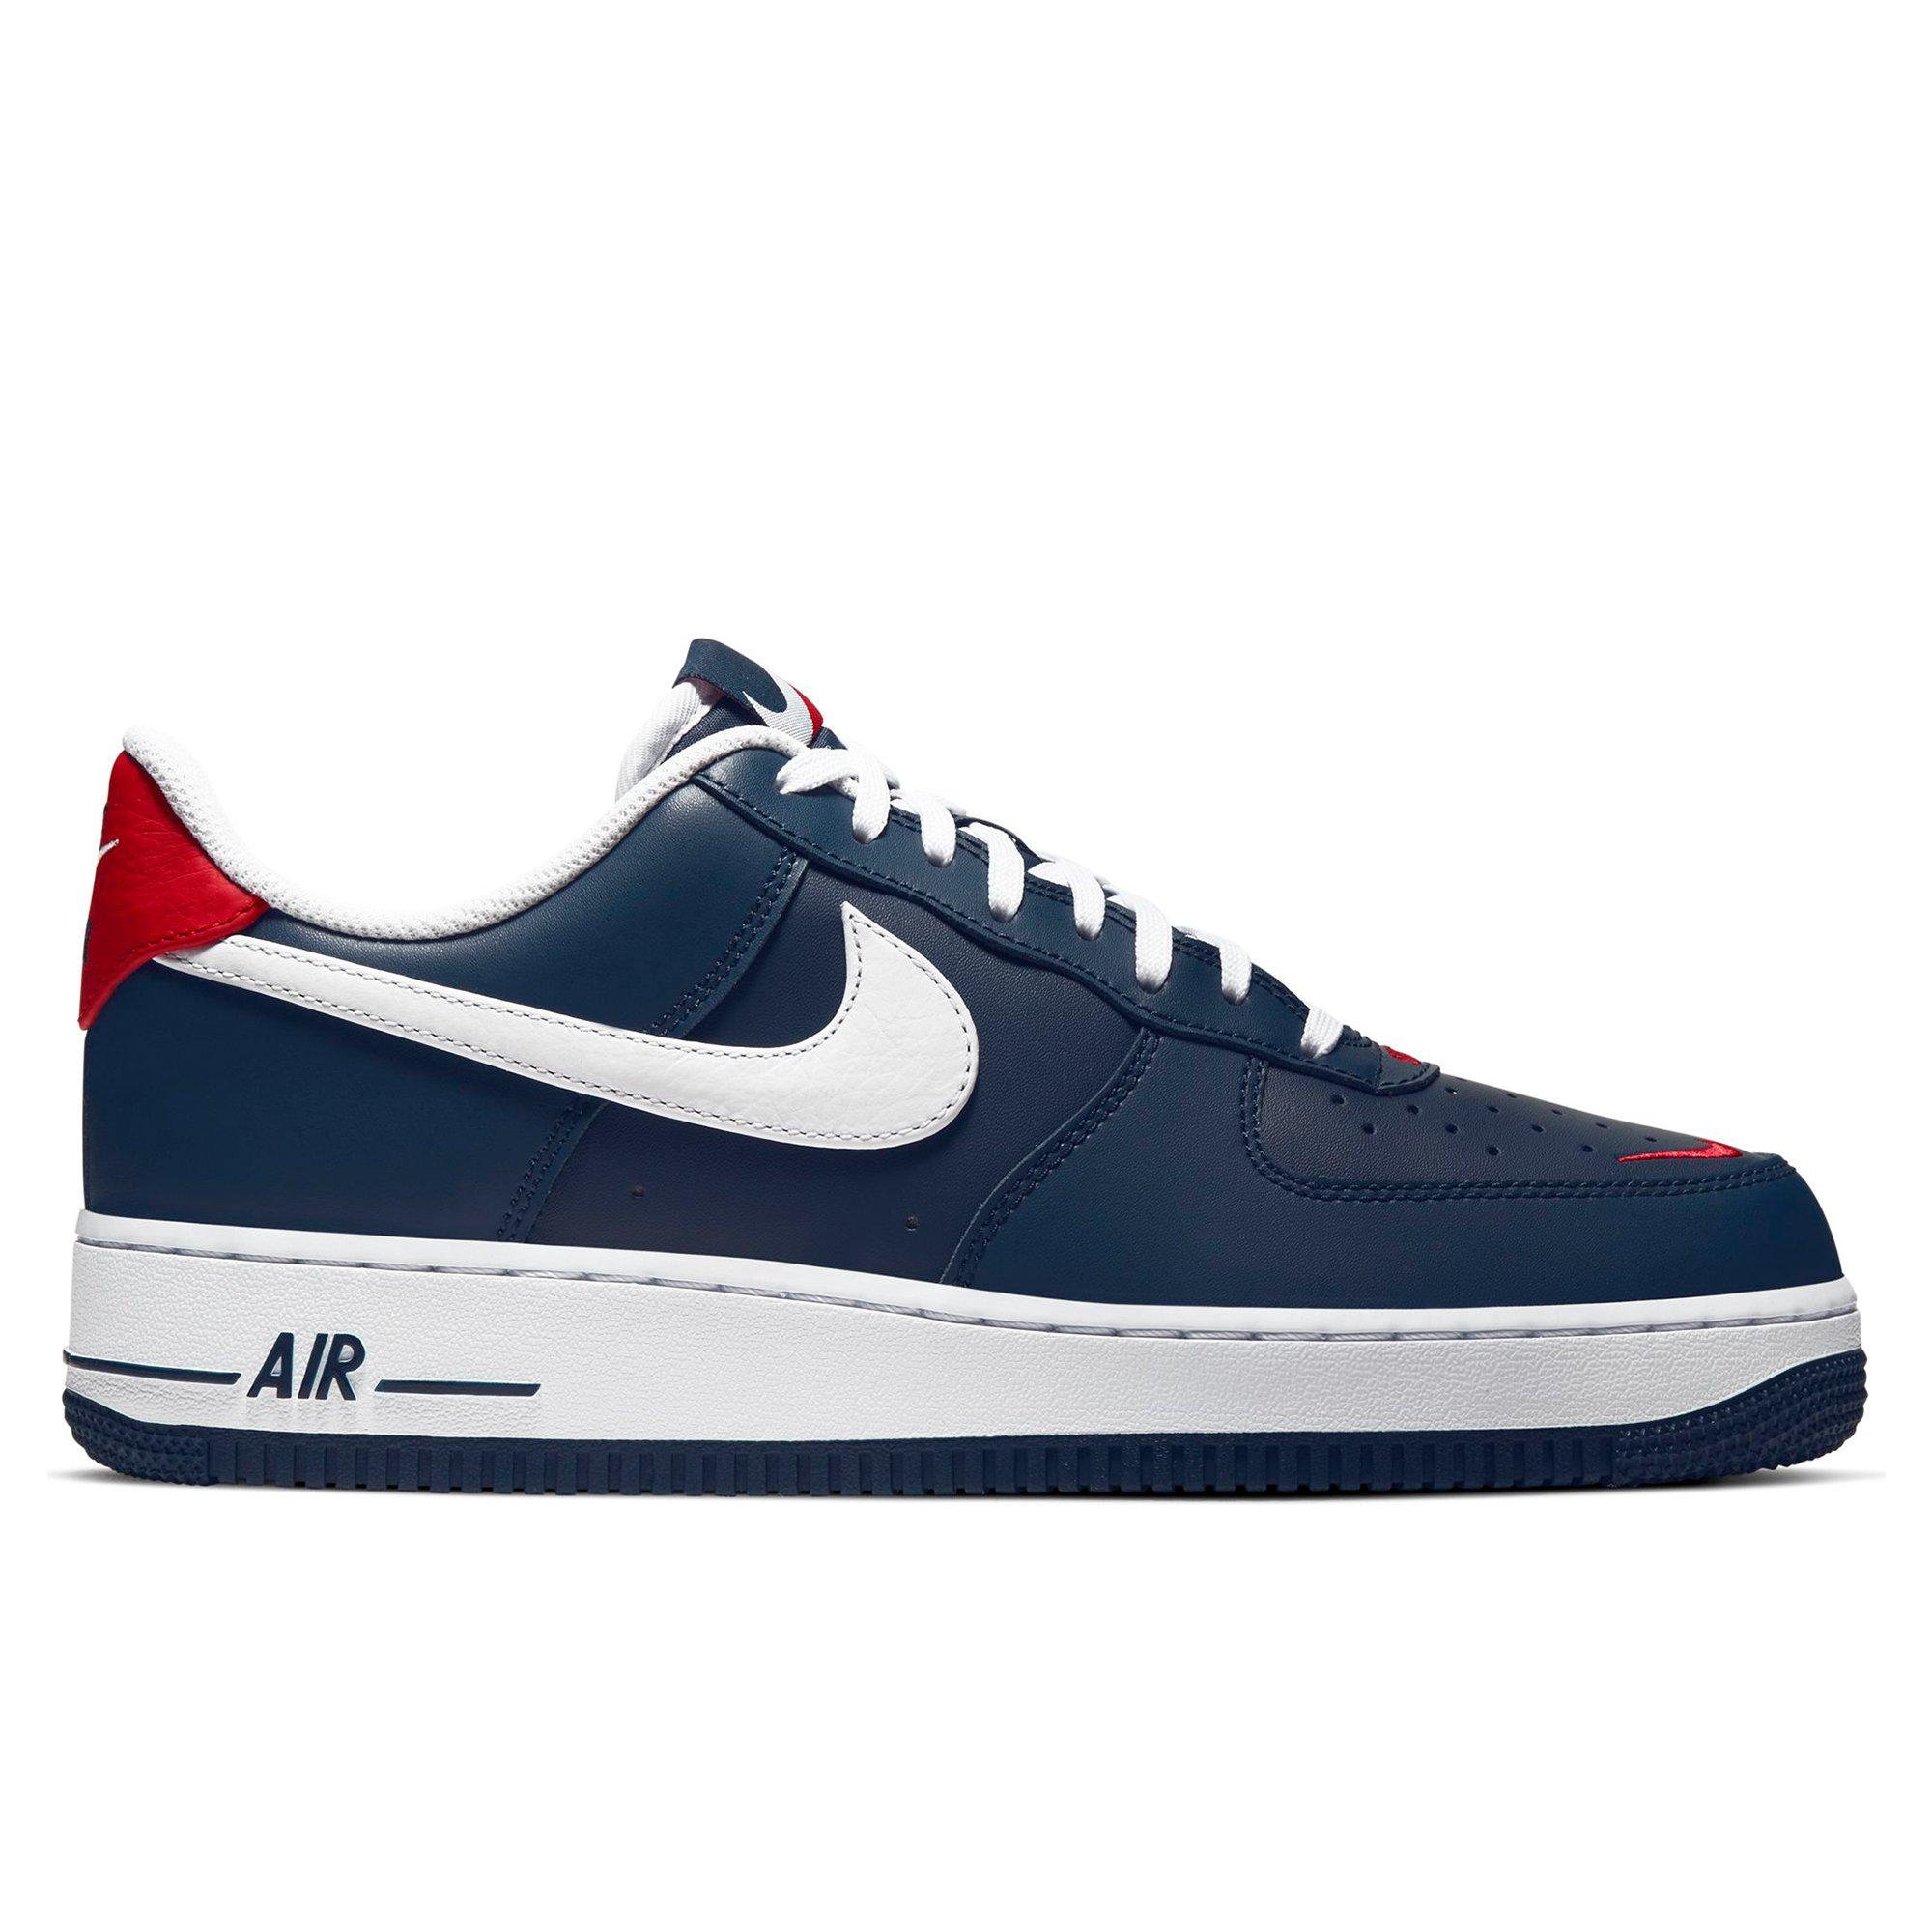 air force ones with blue and red swoosh